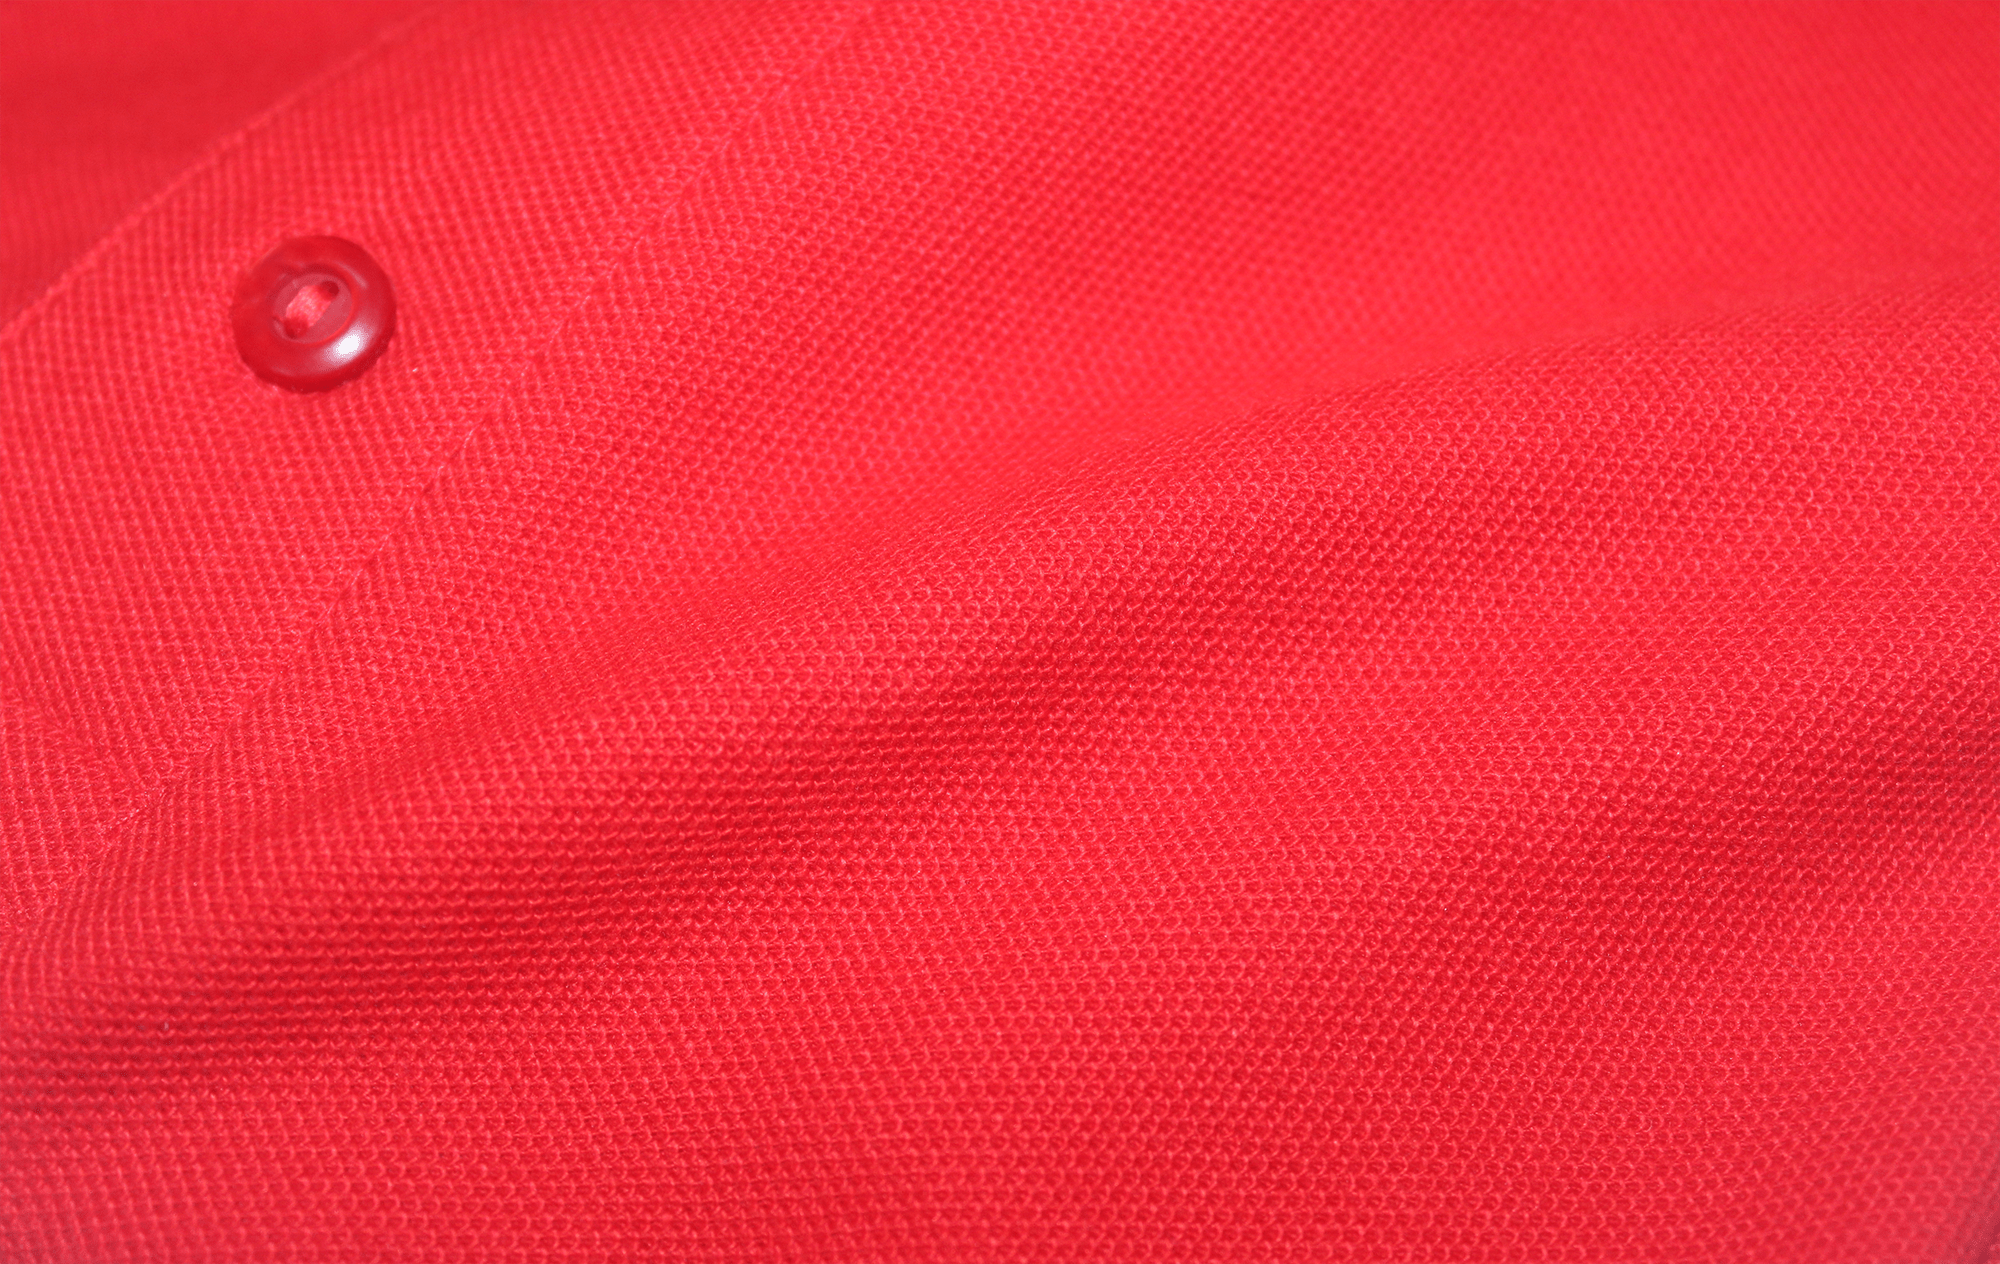 Red Polo Fabric image Hd Small Size